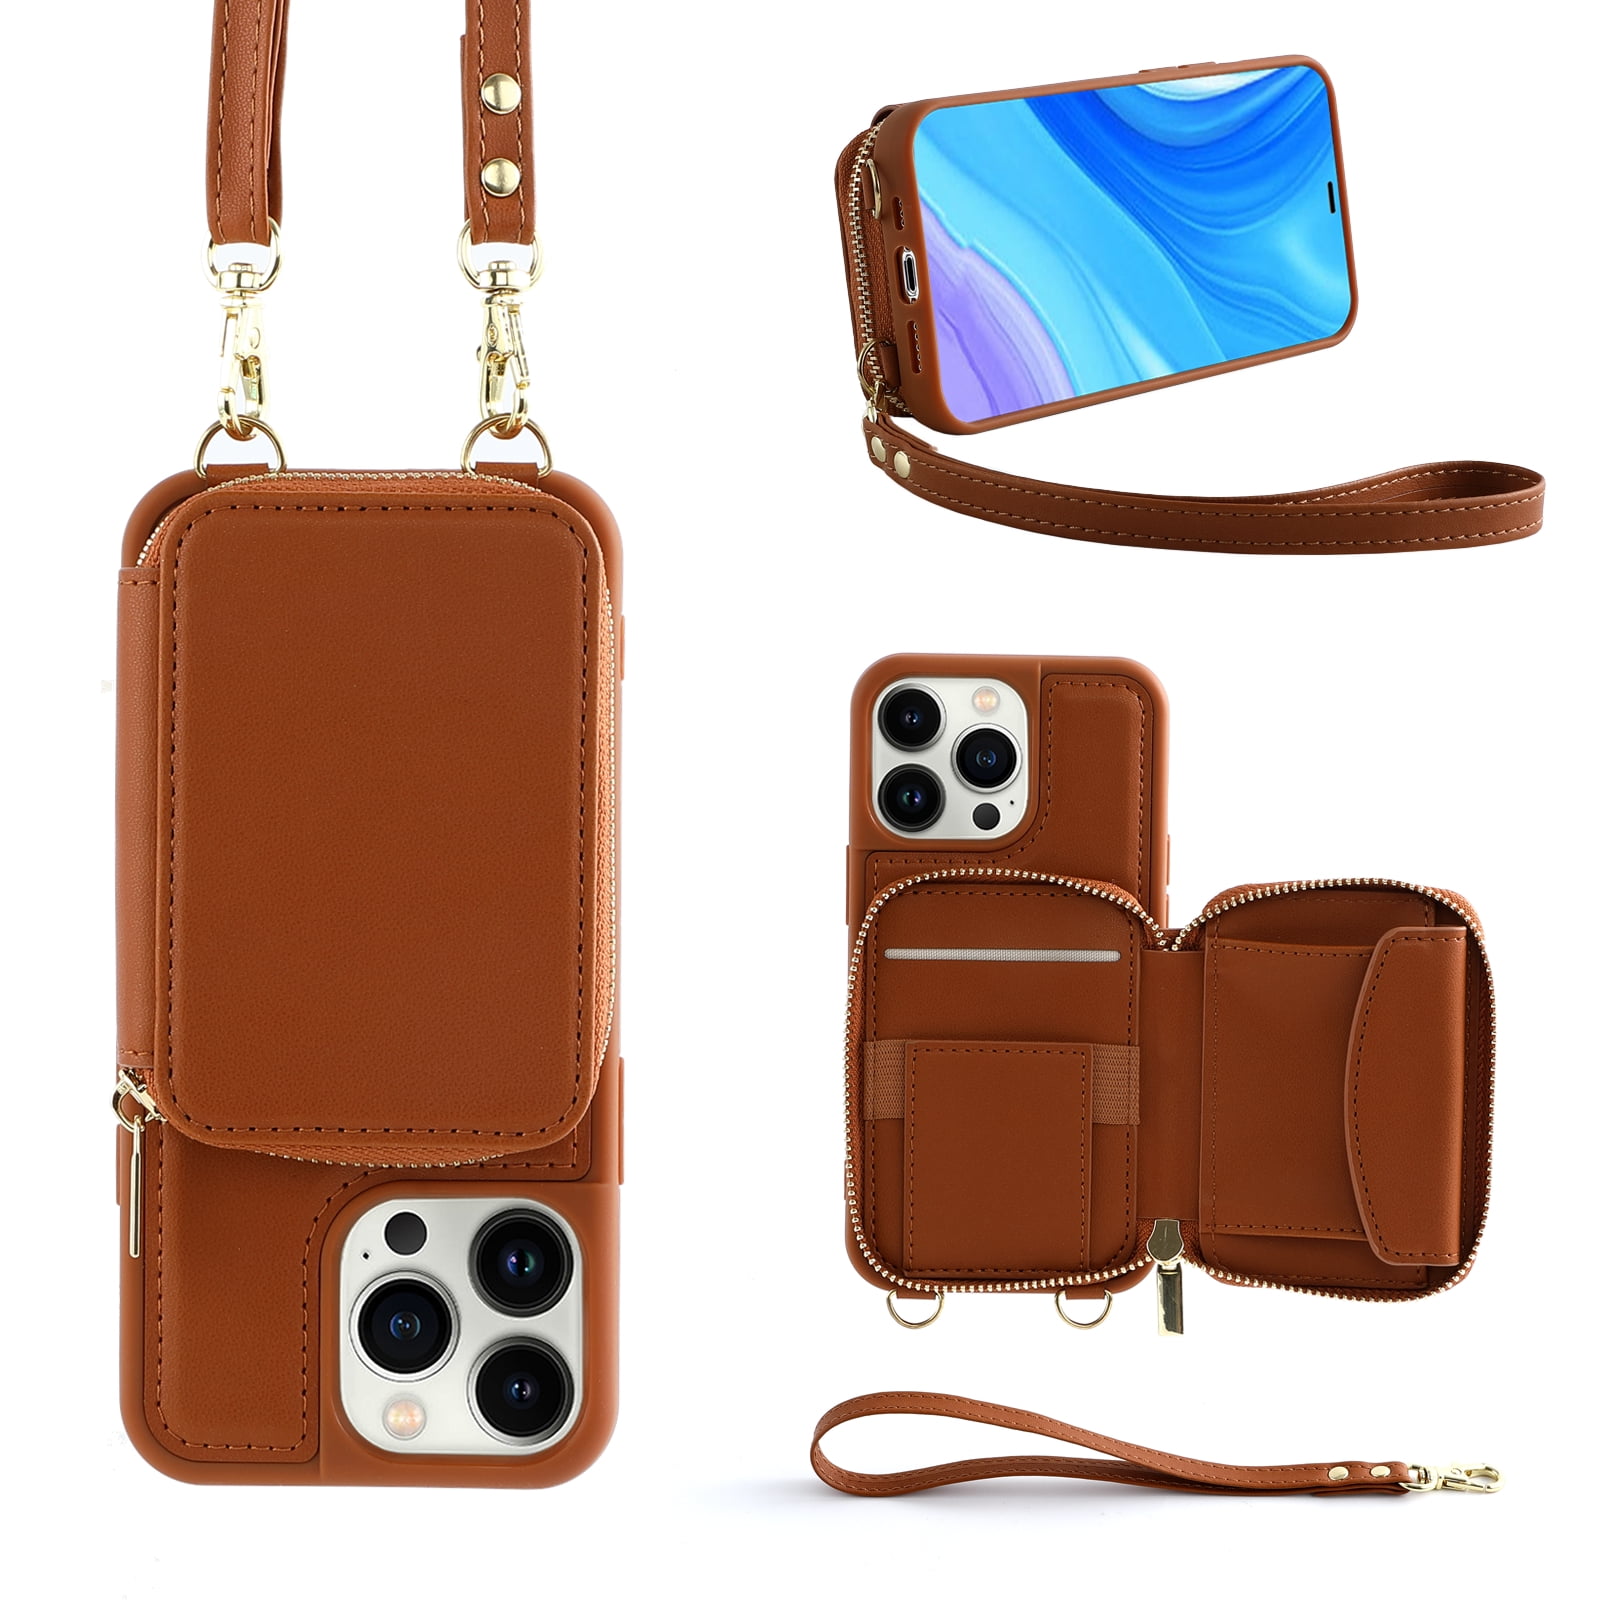 Genuine Pebbled Leather Zipper Pouch Add-On for Crossbody iPhone